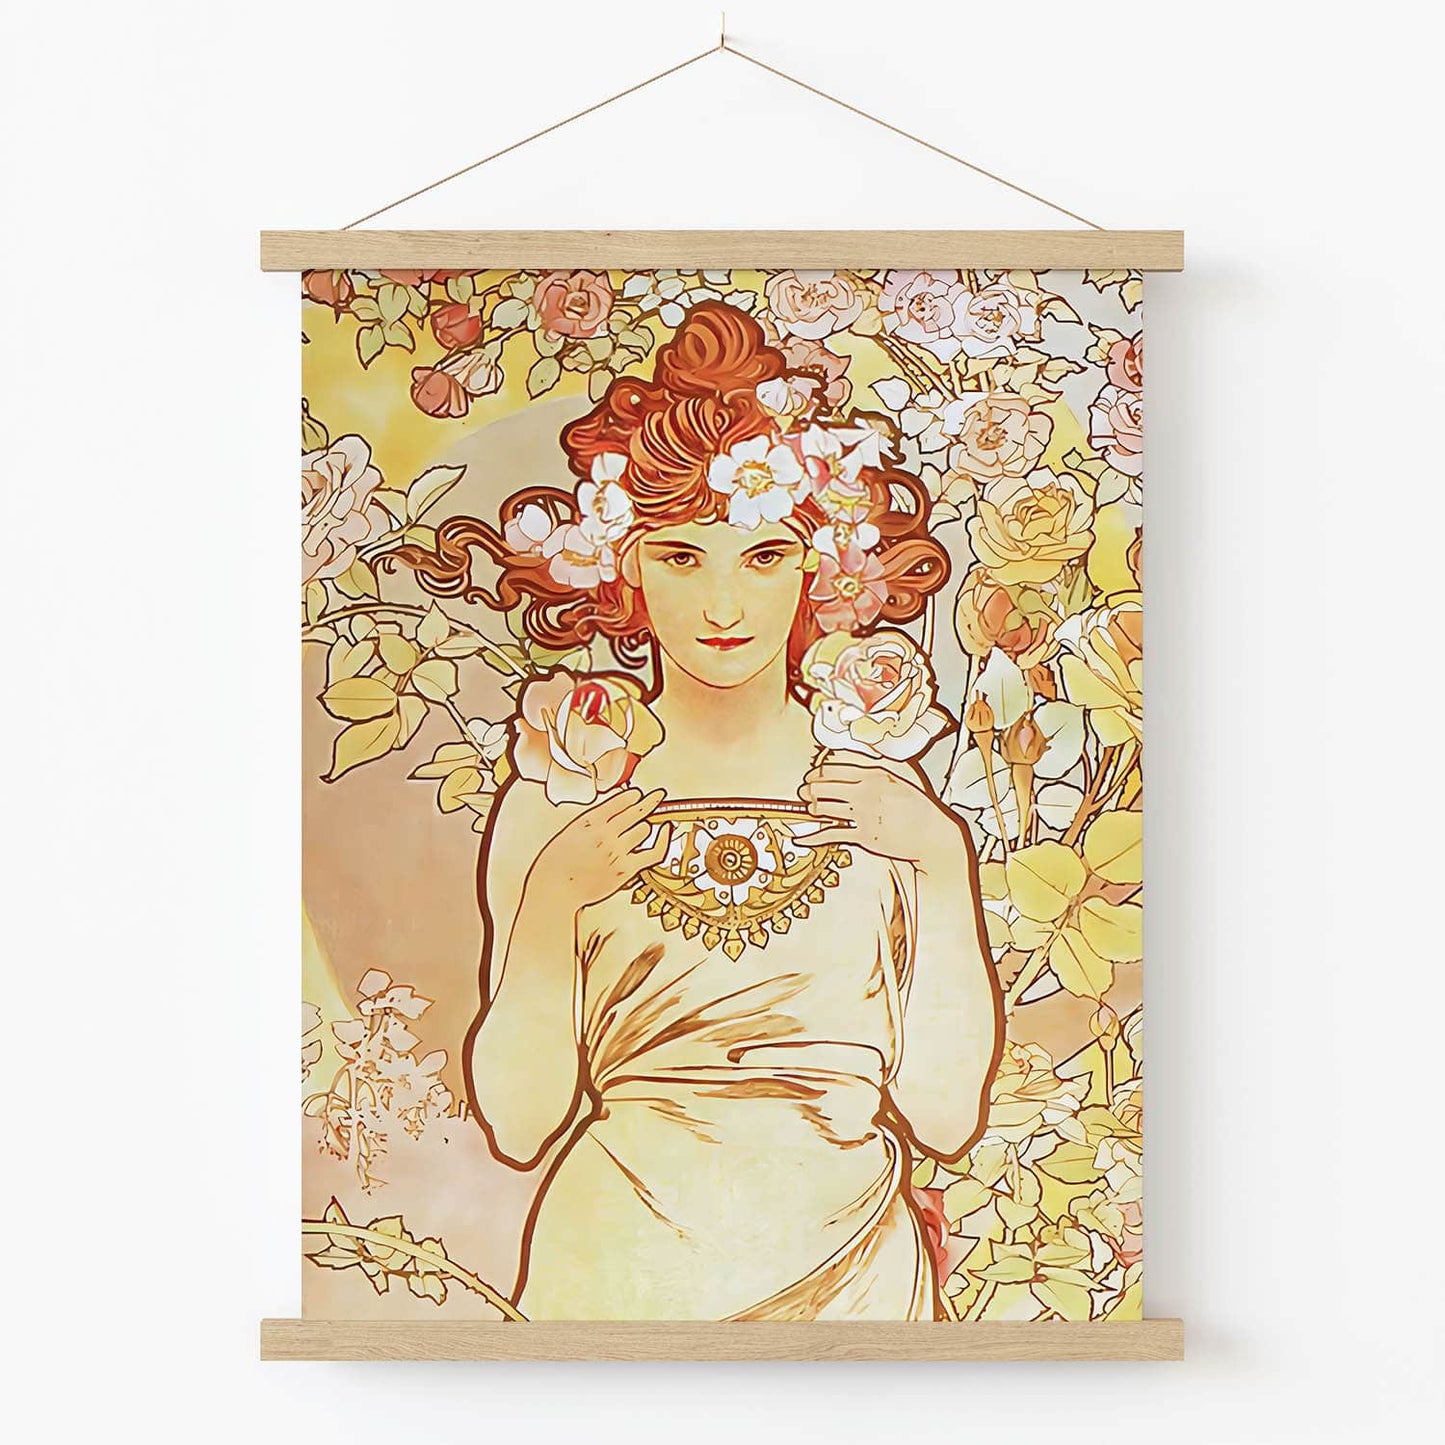 Aesthetic Yellow and Pink Art Print in Wood Hanger Frame on Wall